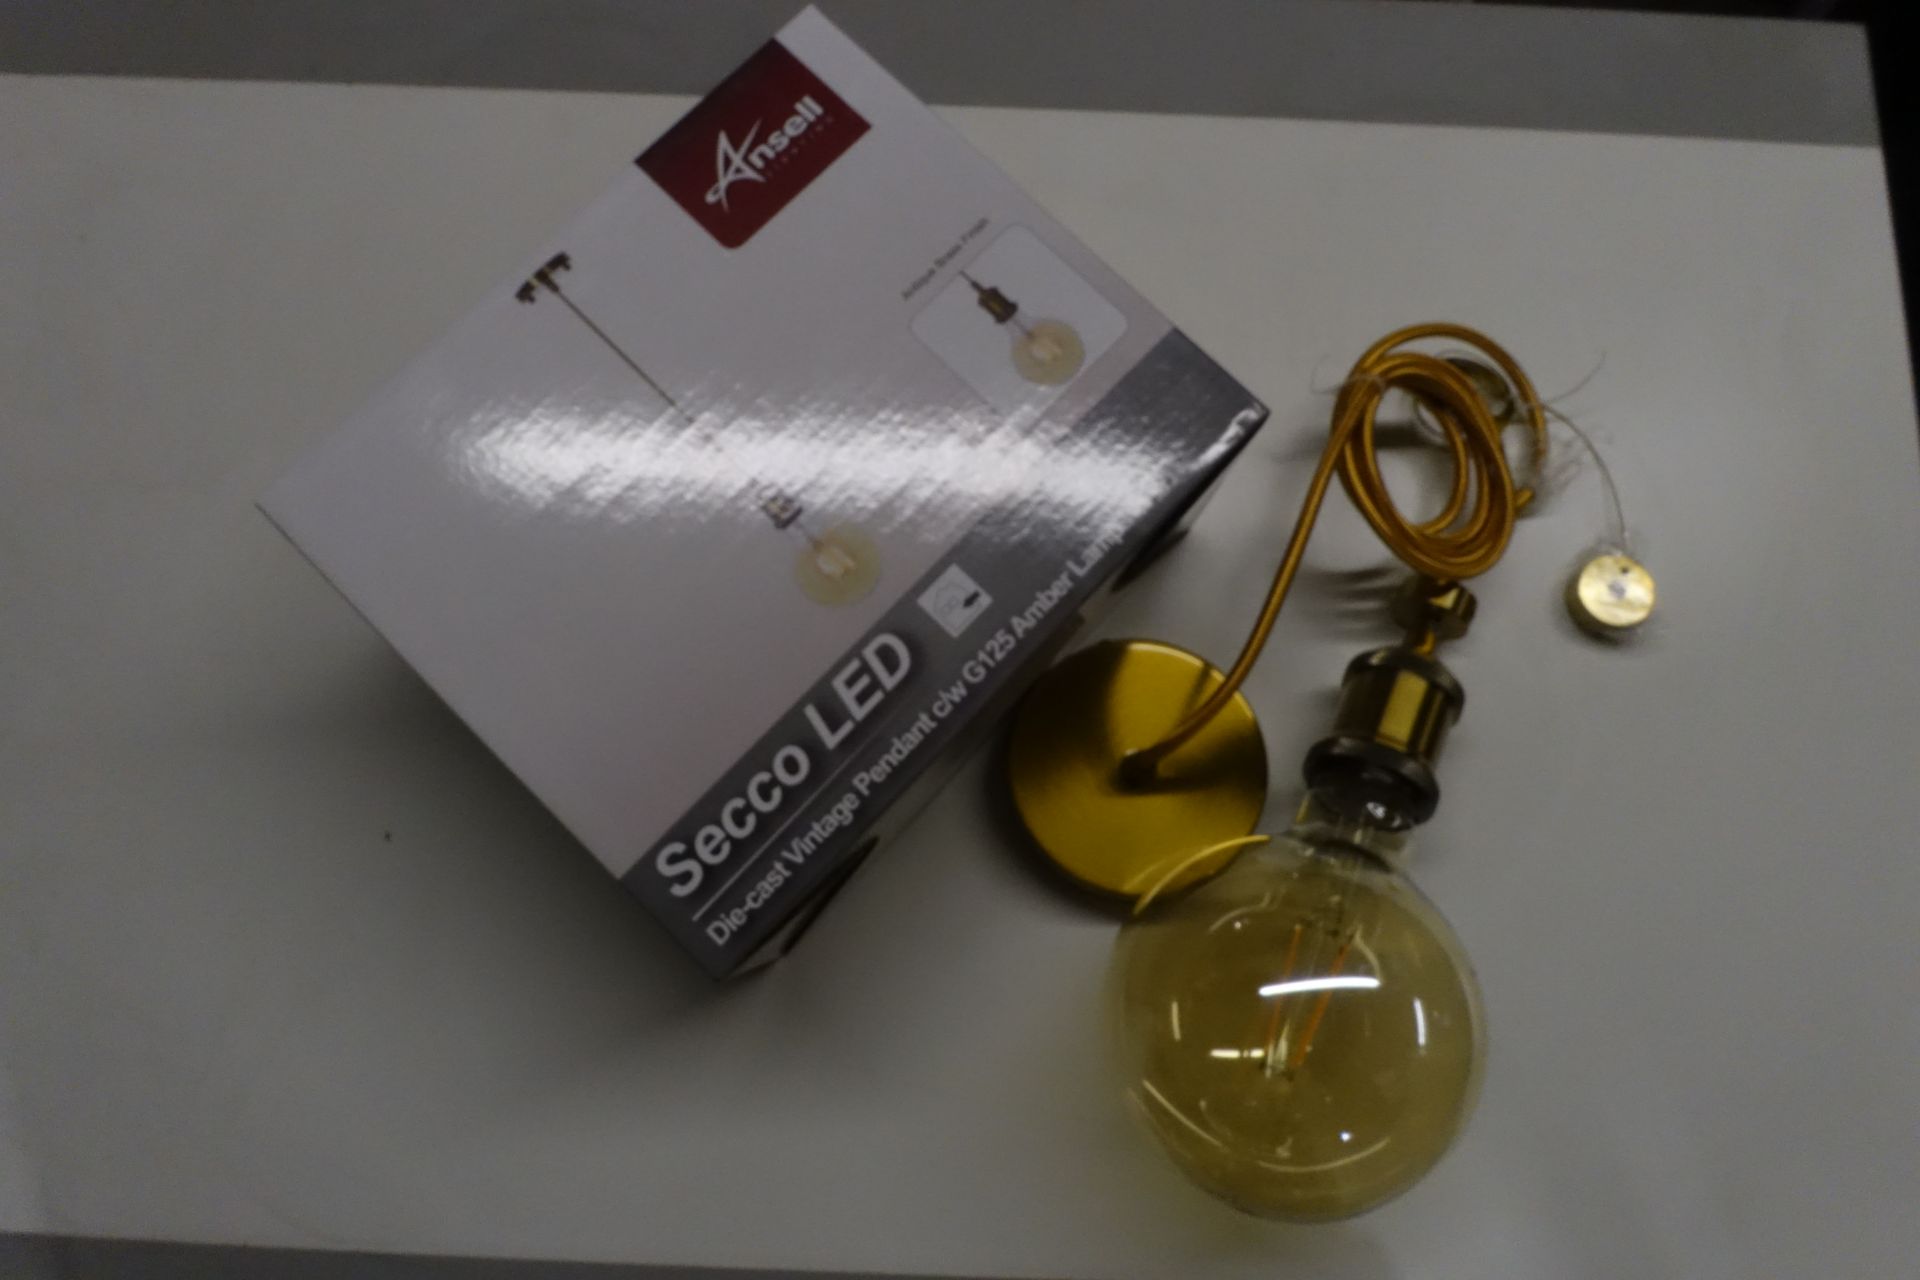 10 x ANSELL ASEC/0125/AB SECCO LED Die- Cast Vintage Pendant Fitting C/W G125 Amber Lamp Antique